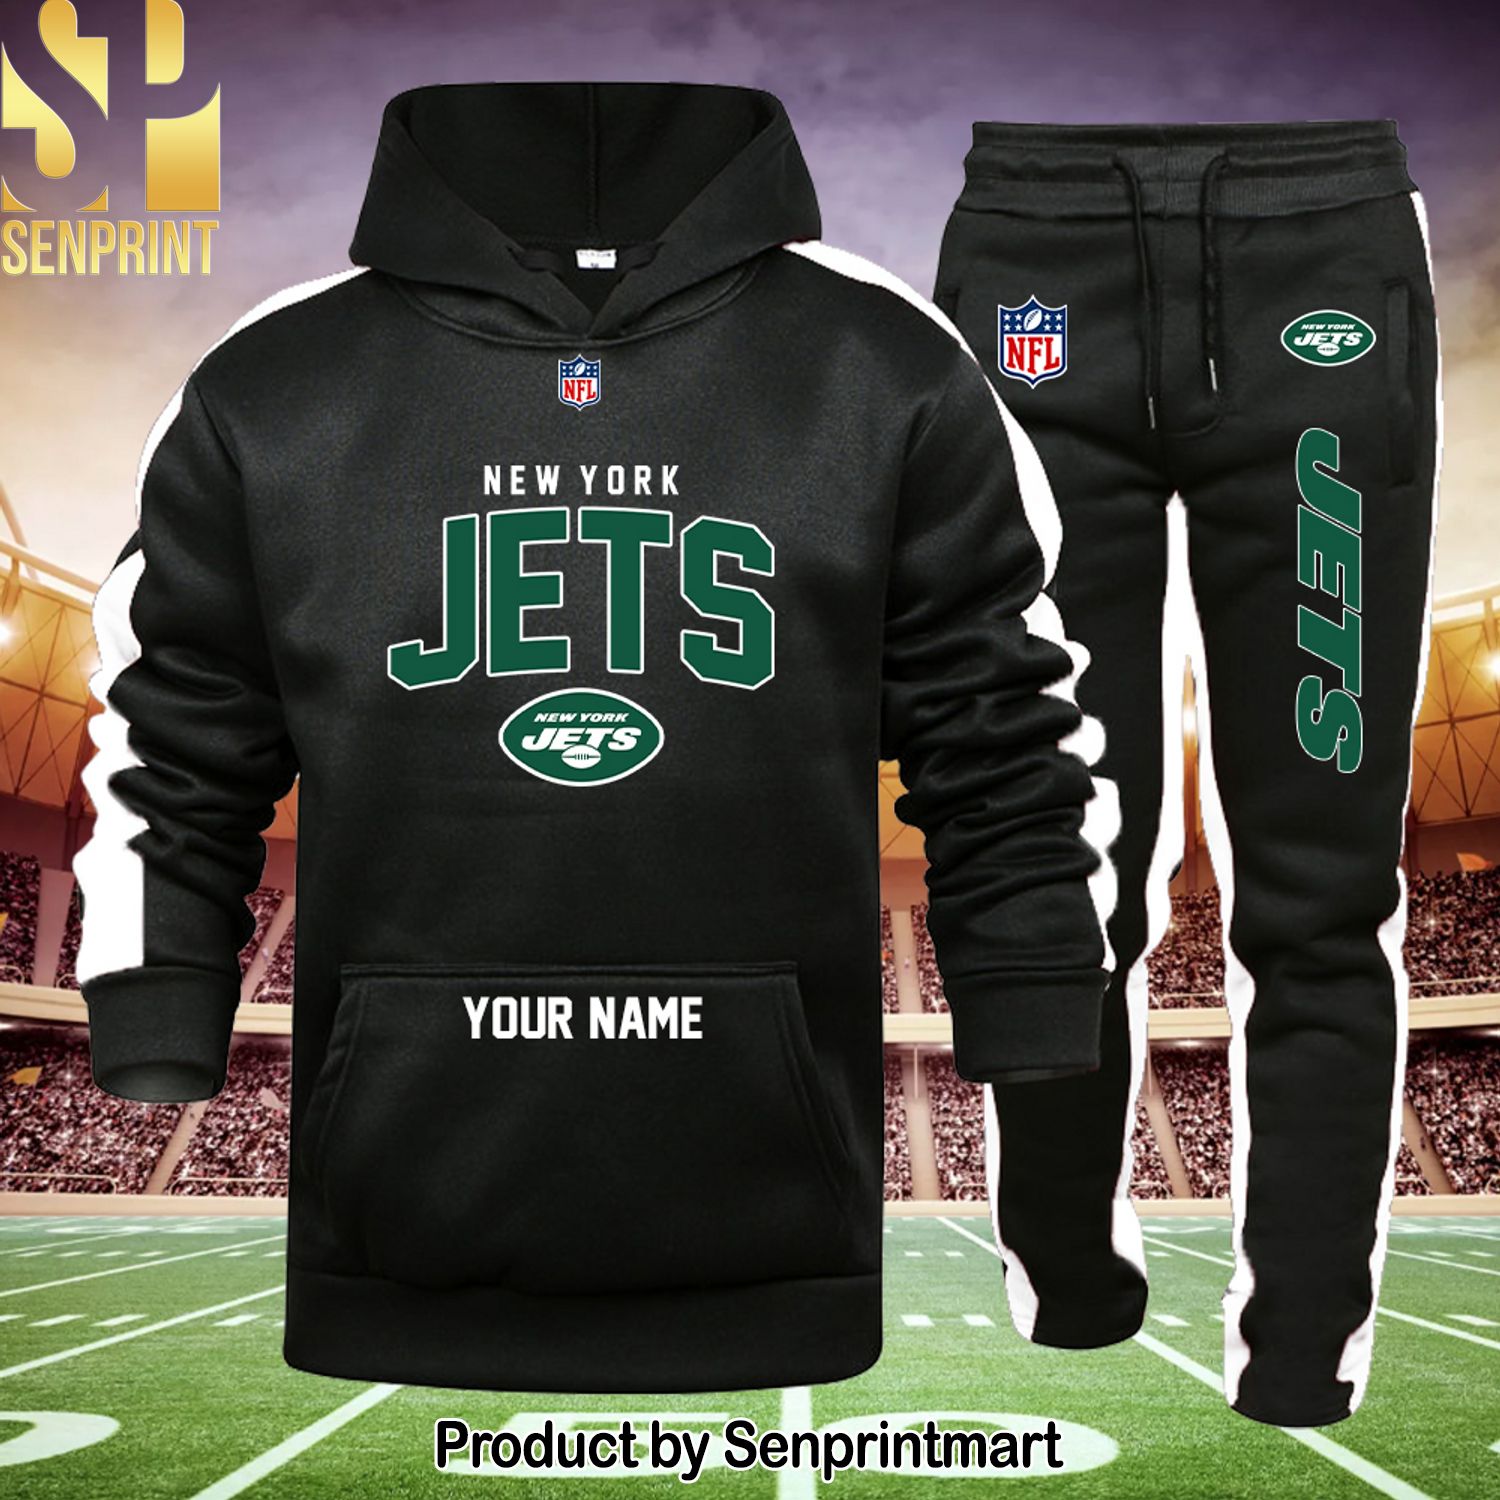 NFL New York Jets Classic All Over Print Shirt and Sweatpants